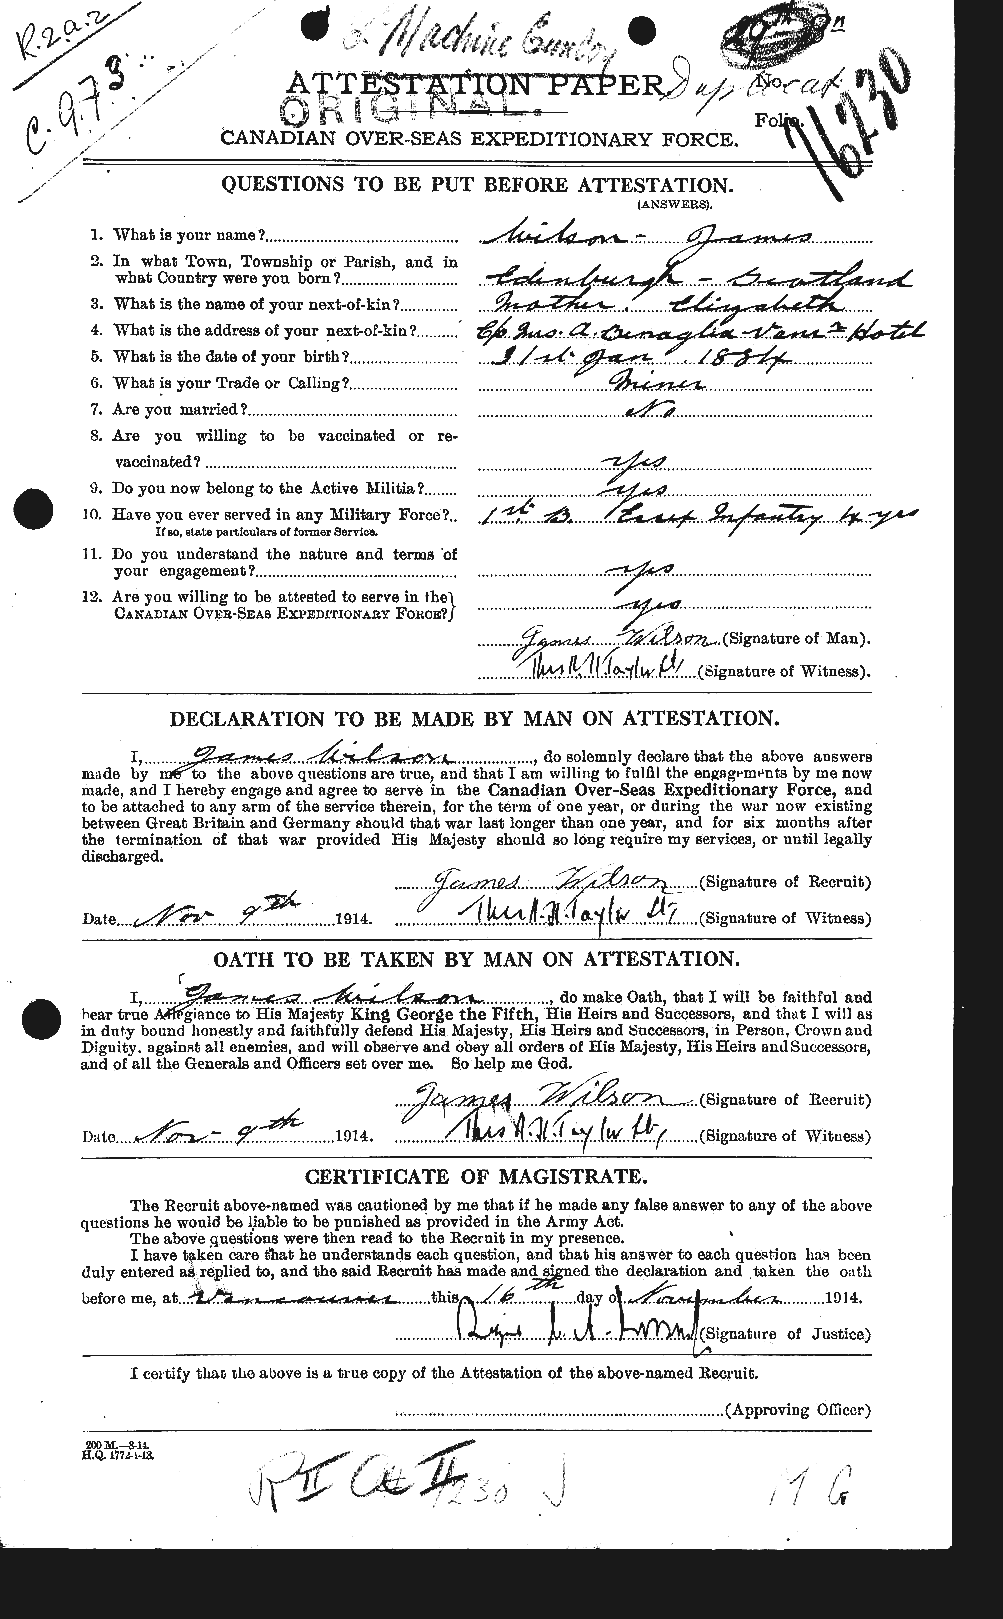 Personnel Records of the First World War - CEF 681352a